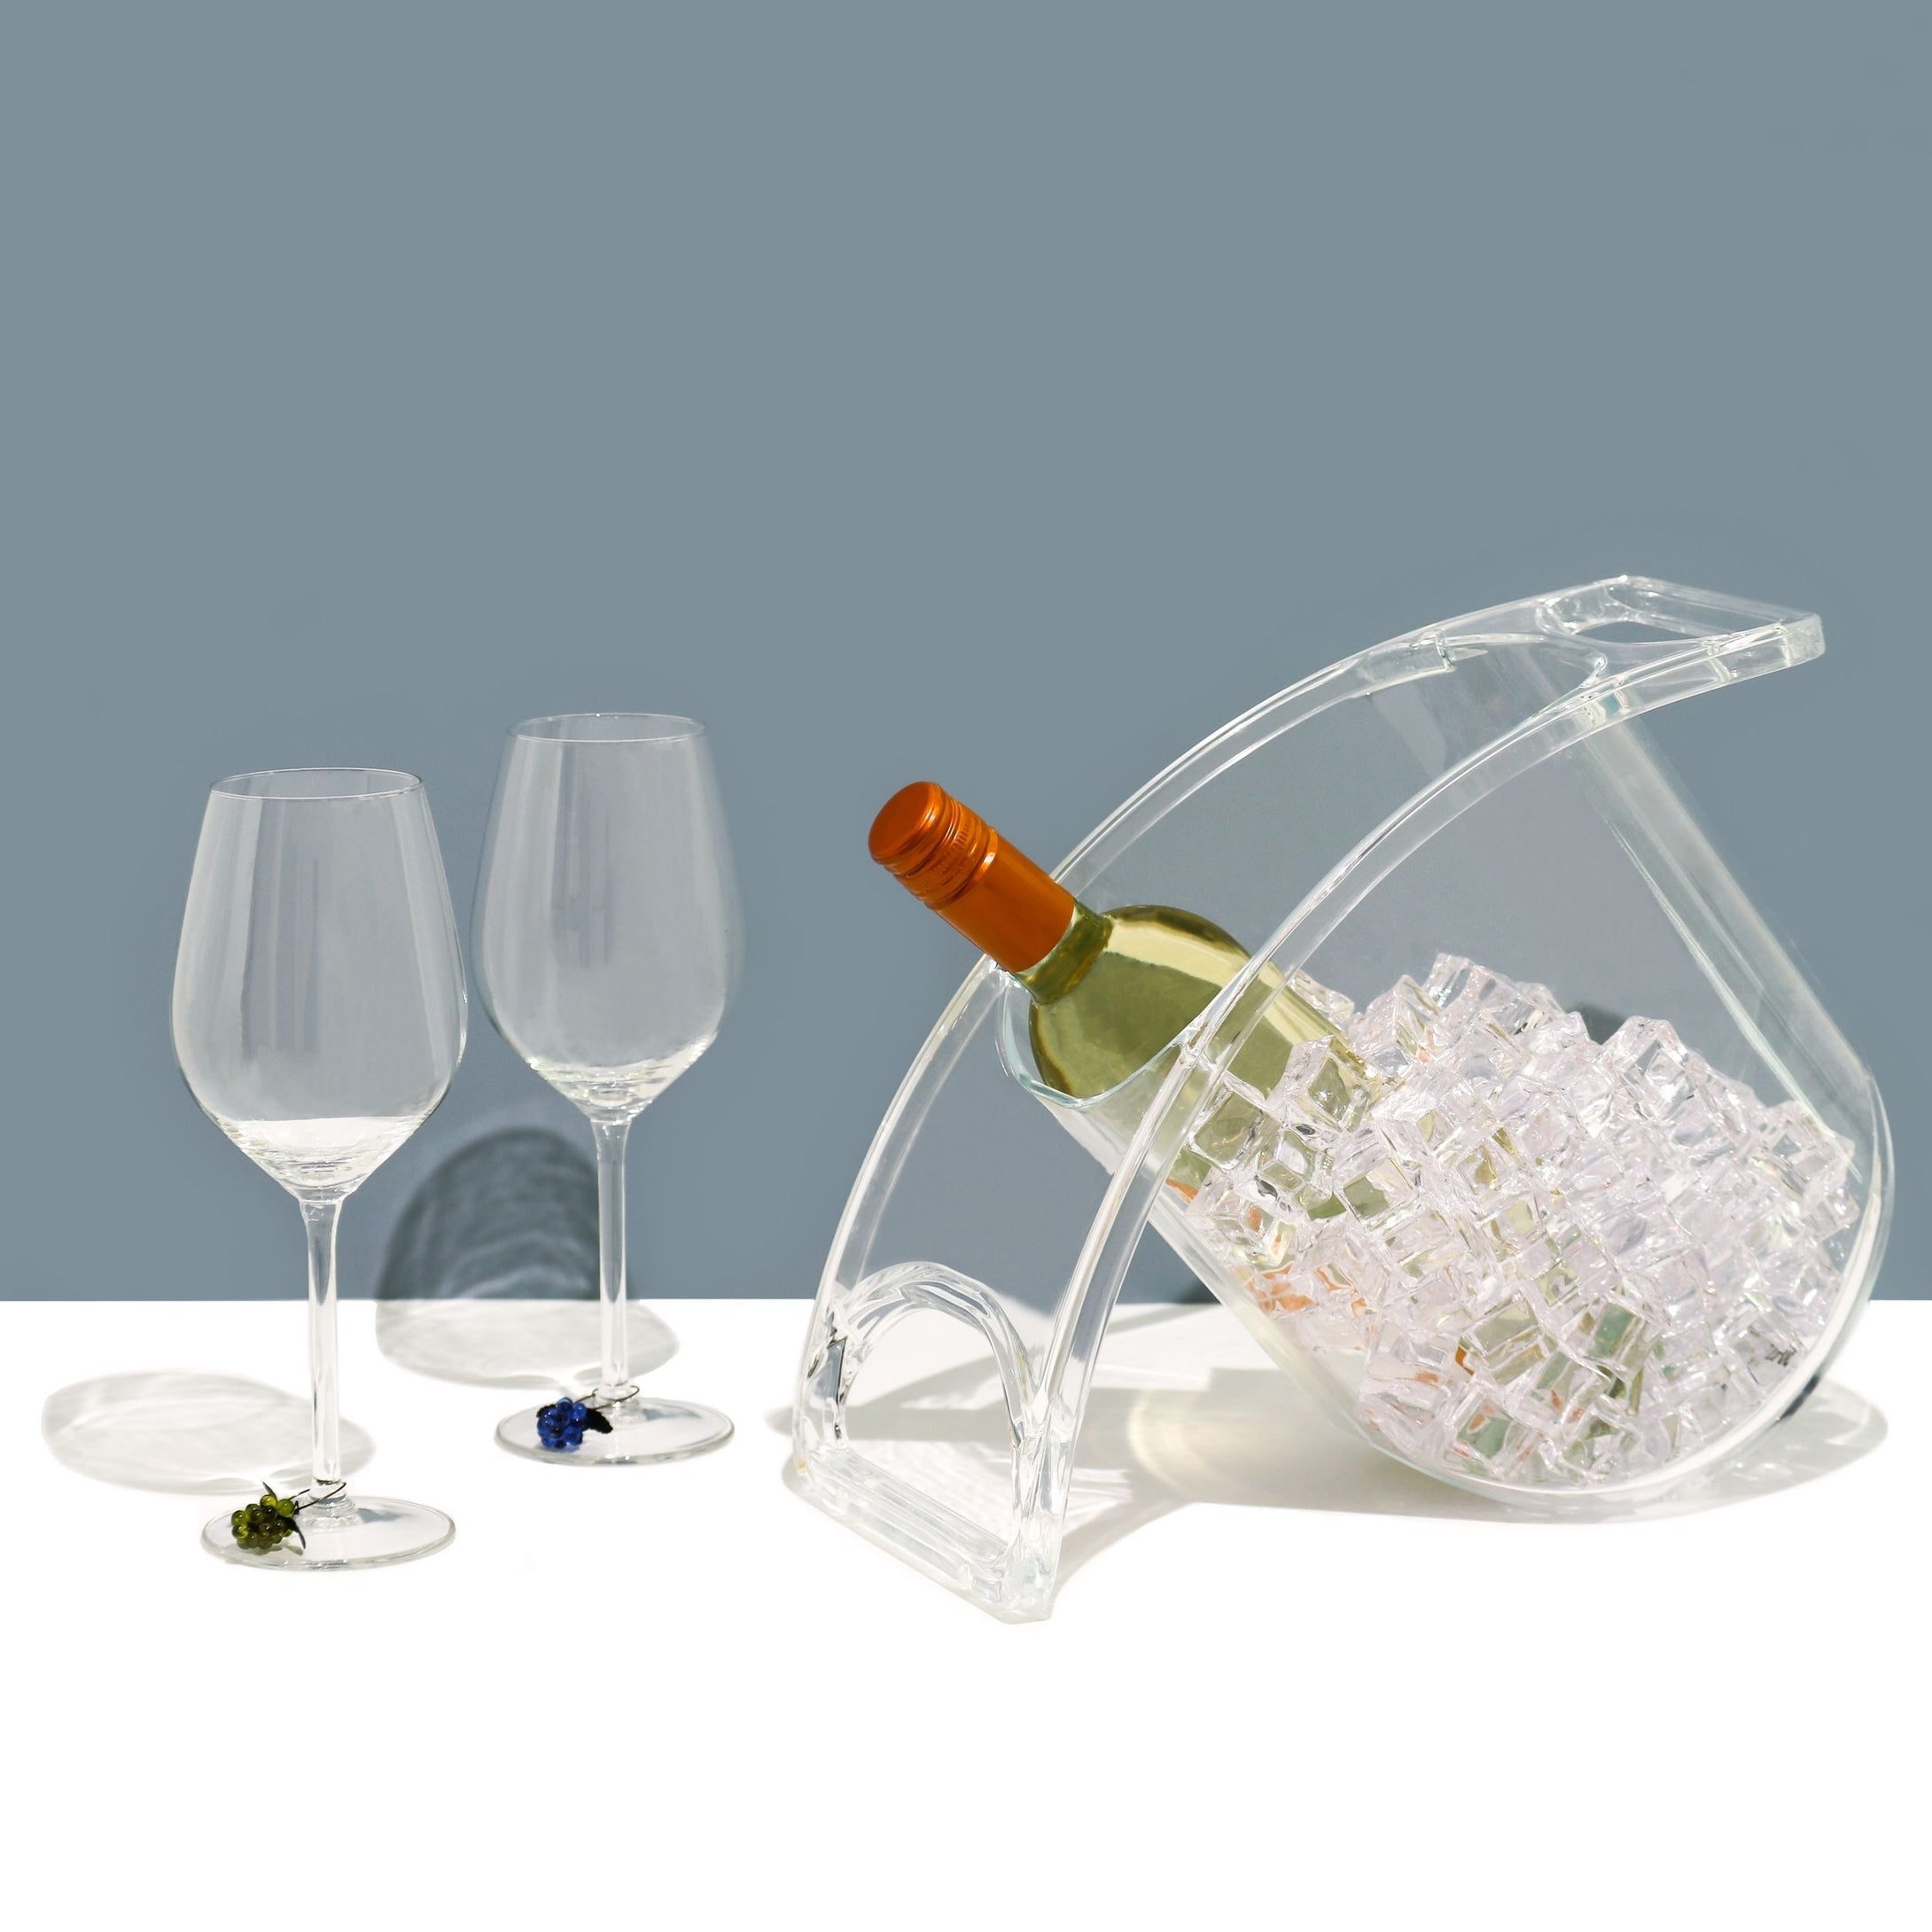 Coolin Curve - Wine and Beverage Ice Bucket